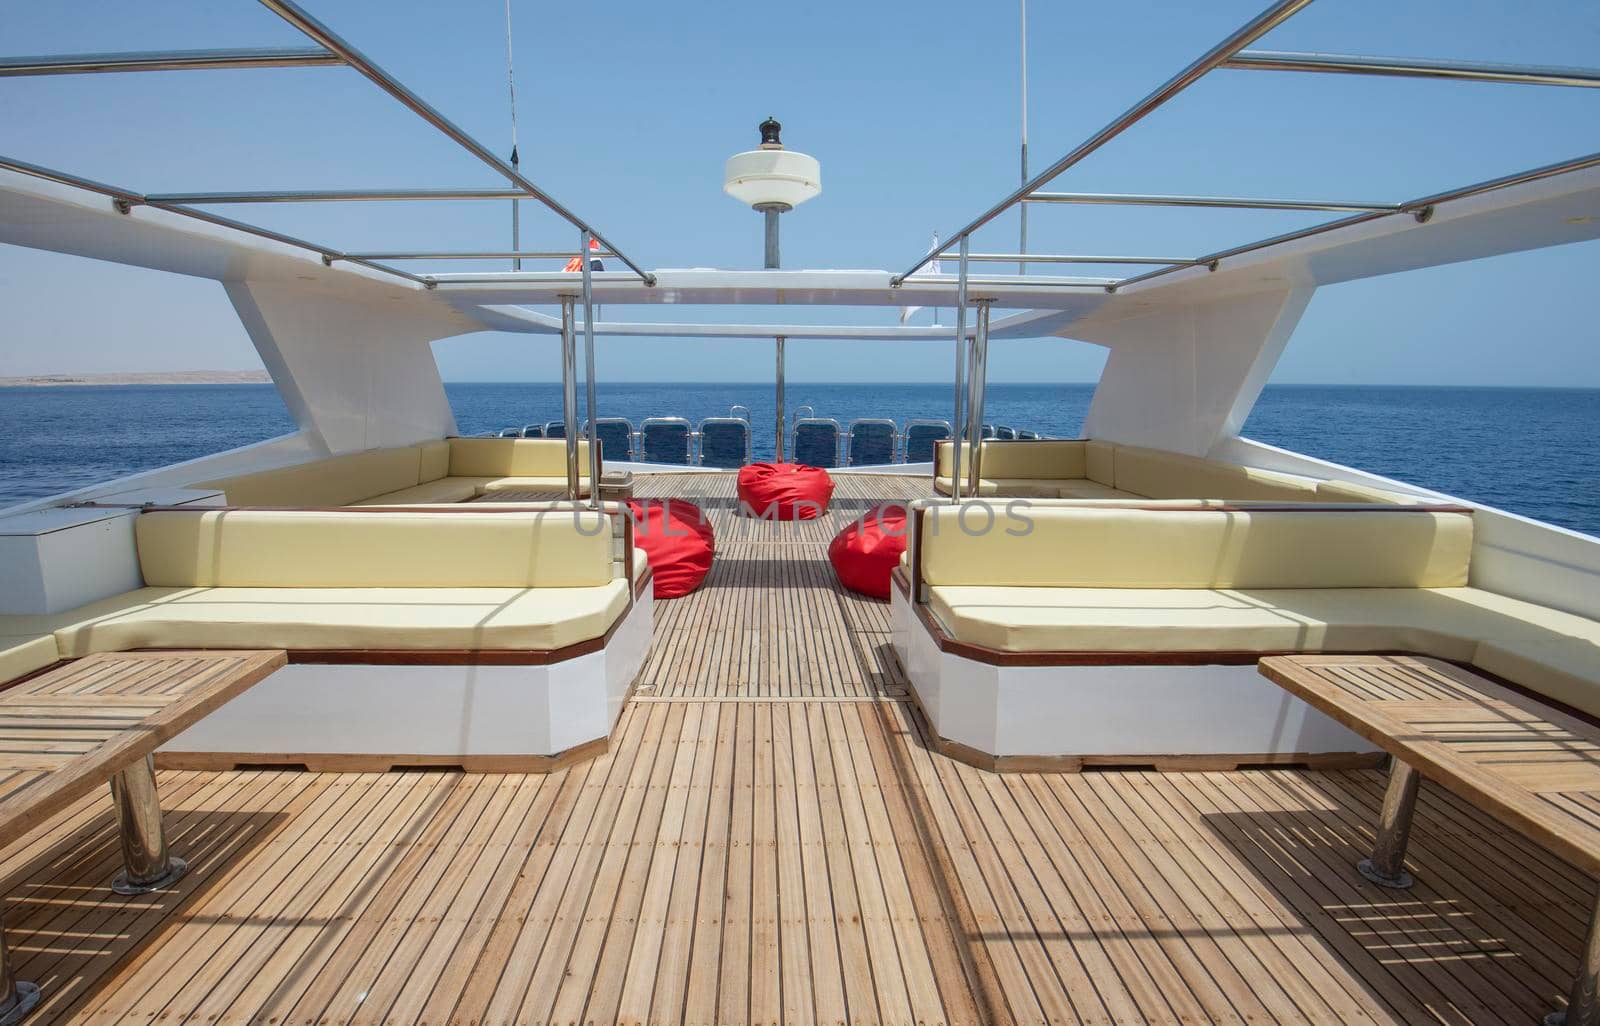 Teak wooden sundeck of a large luxury motor yacht with chairs sofa table and tropical sea view background